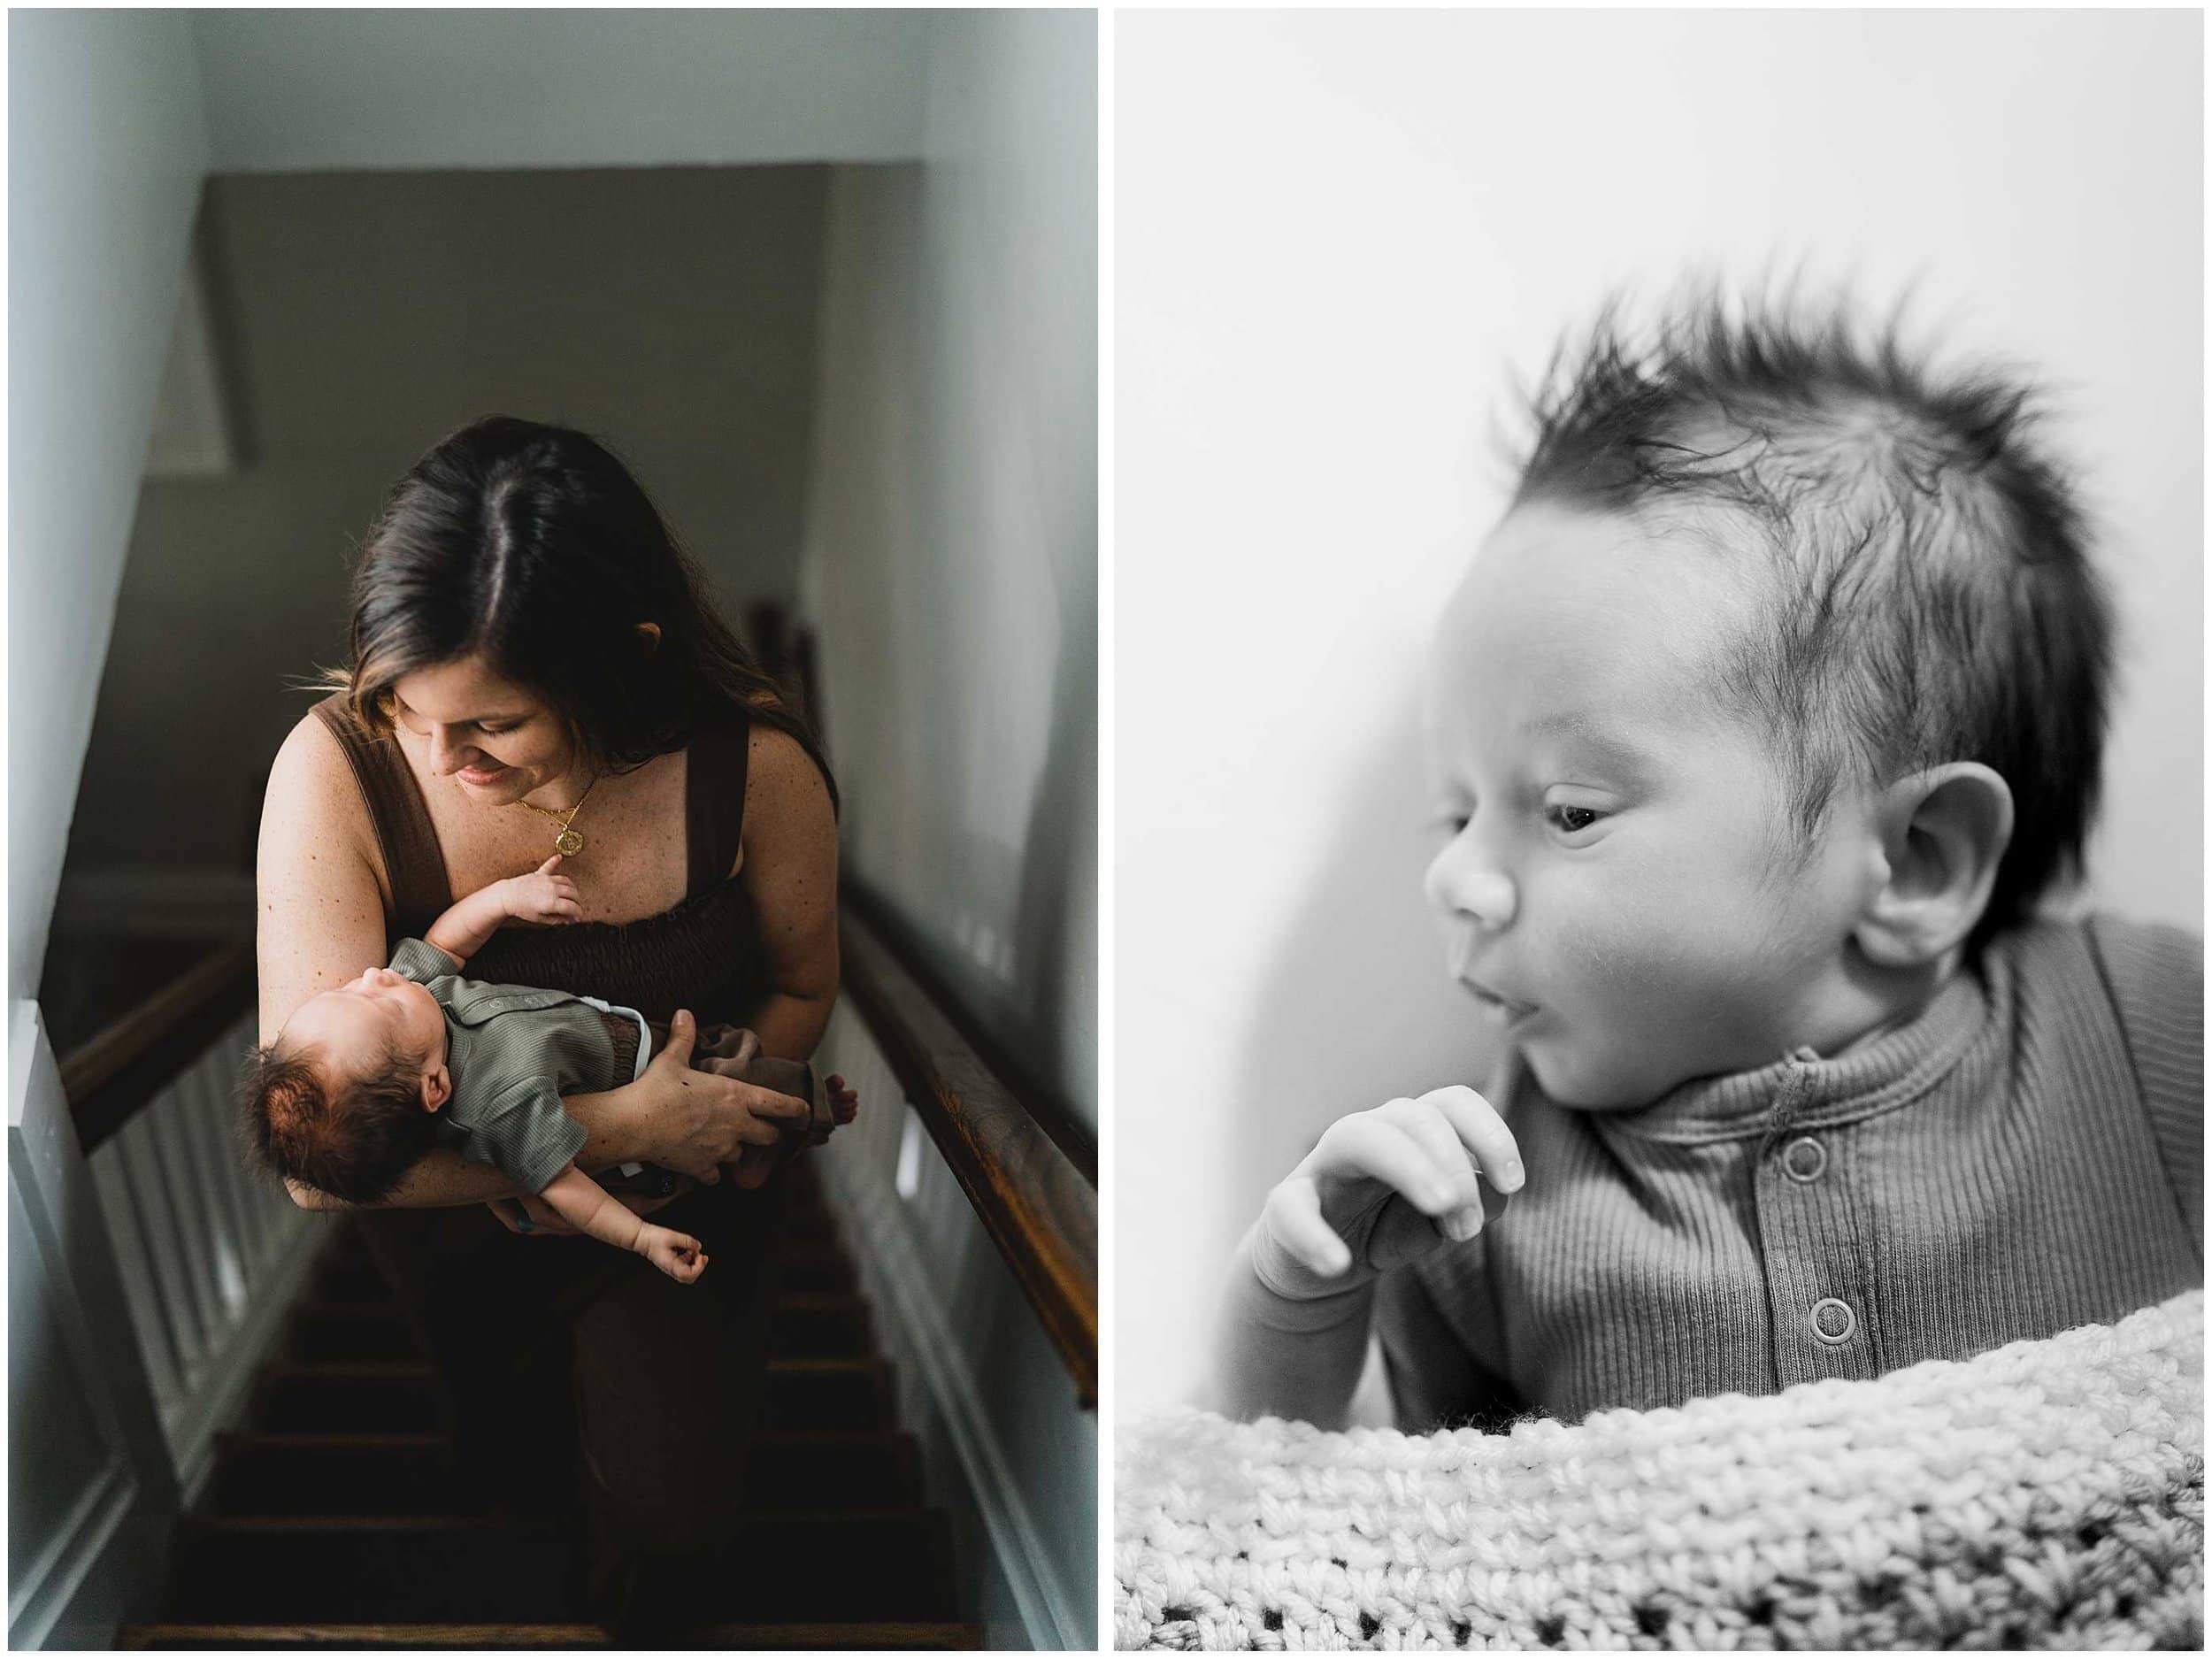 A photo collage of a mom carrying her baby up the stairs of their home, and a close-up image of the baby's face on the right